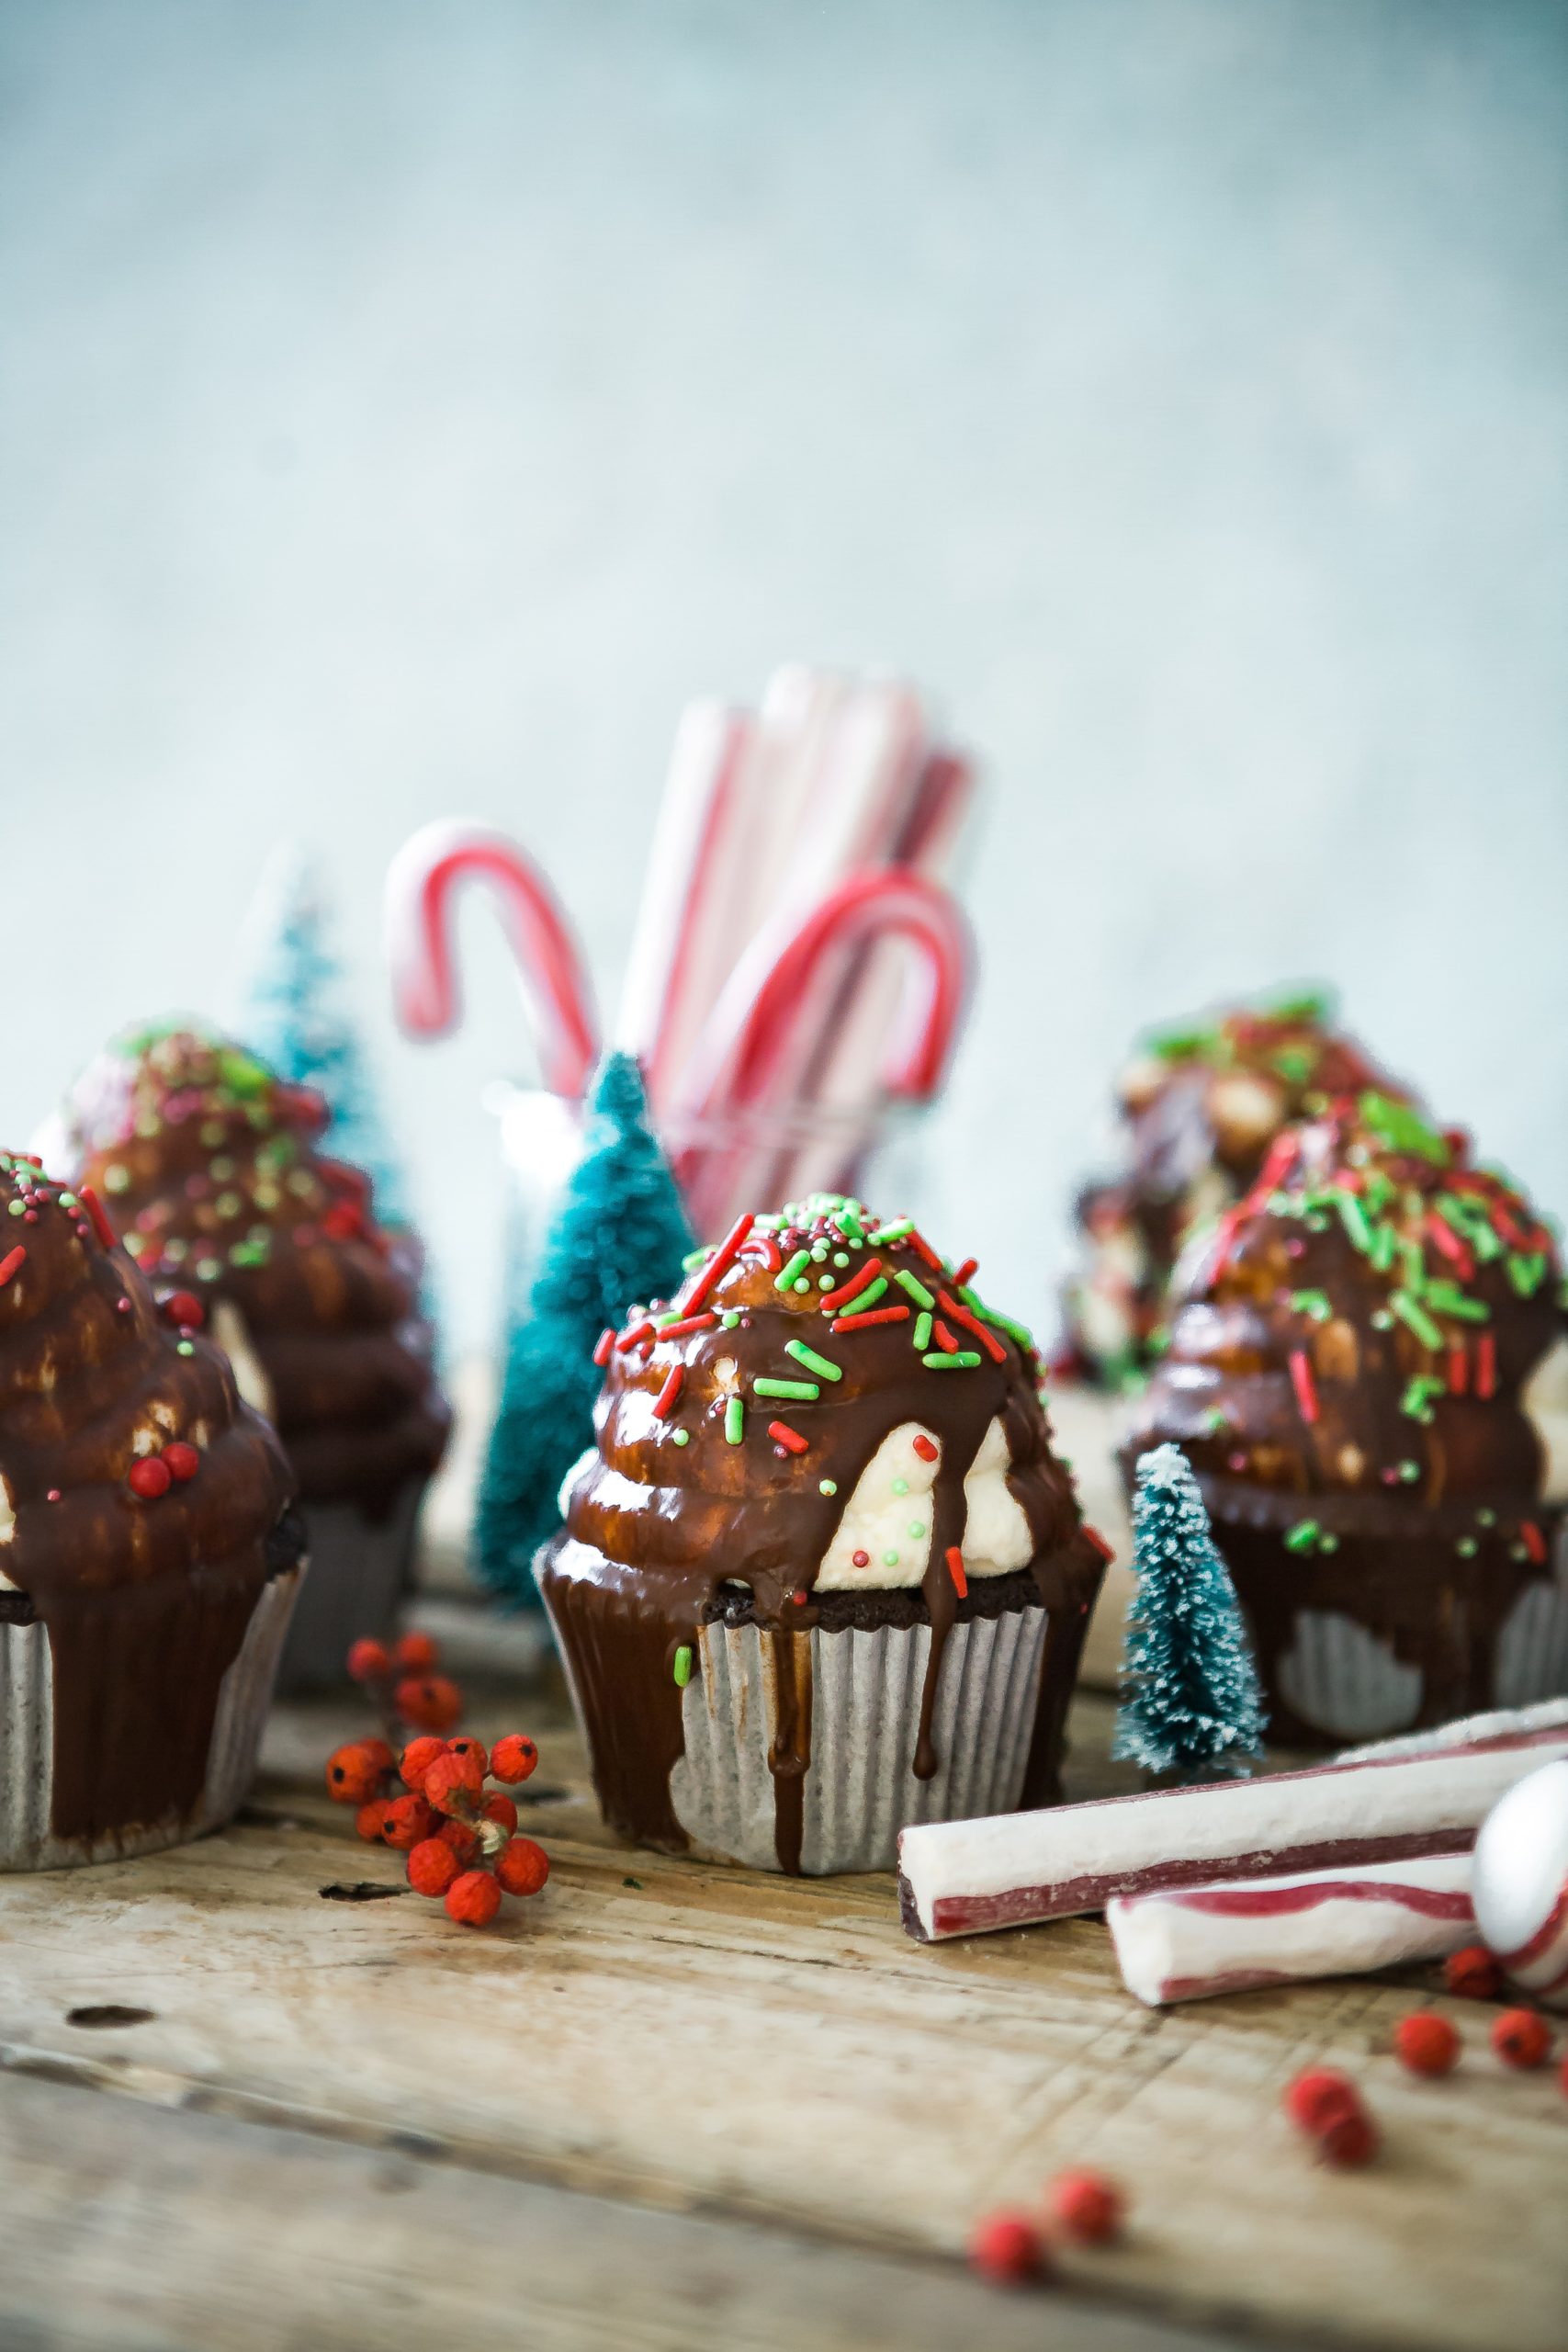 Christmas chocolate sprinkle cupcakes and candy canes on wooden table